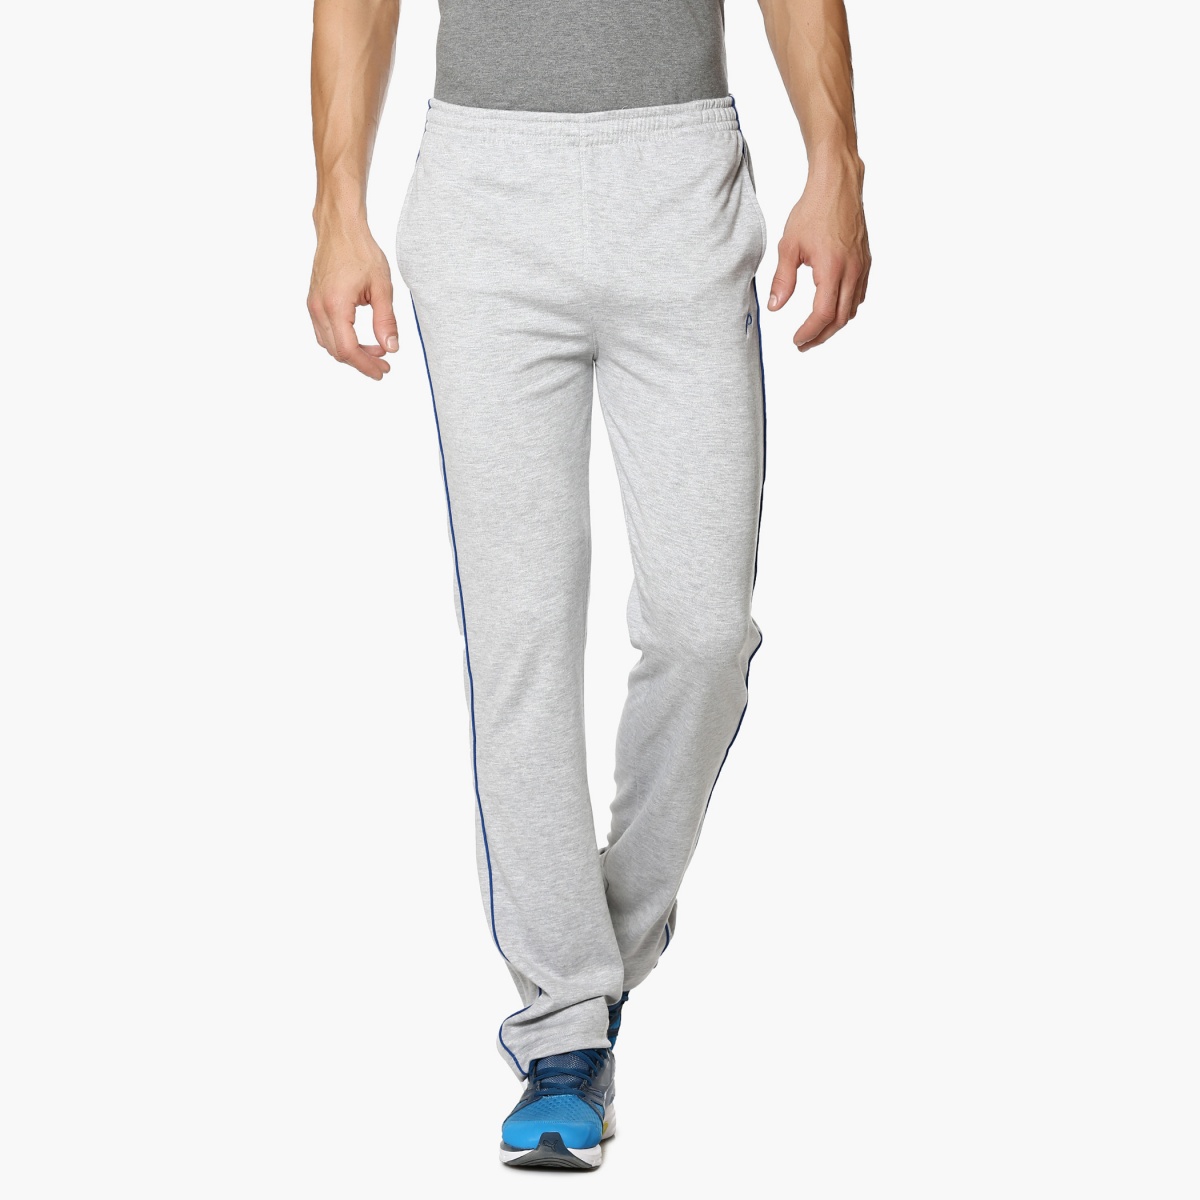 Buy Proline Men Regular Fit Track Pants(PA079LCML_CML_L) at Amazon.in